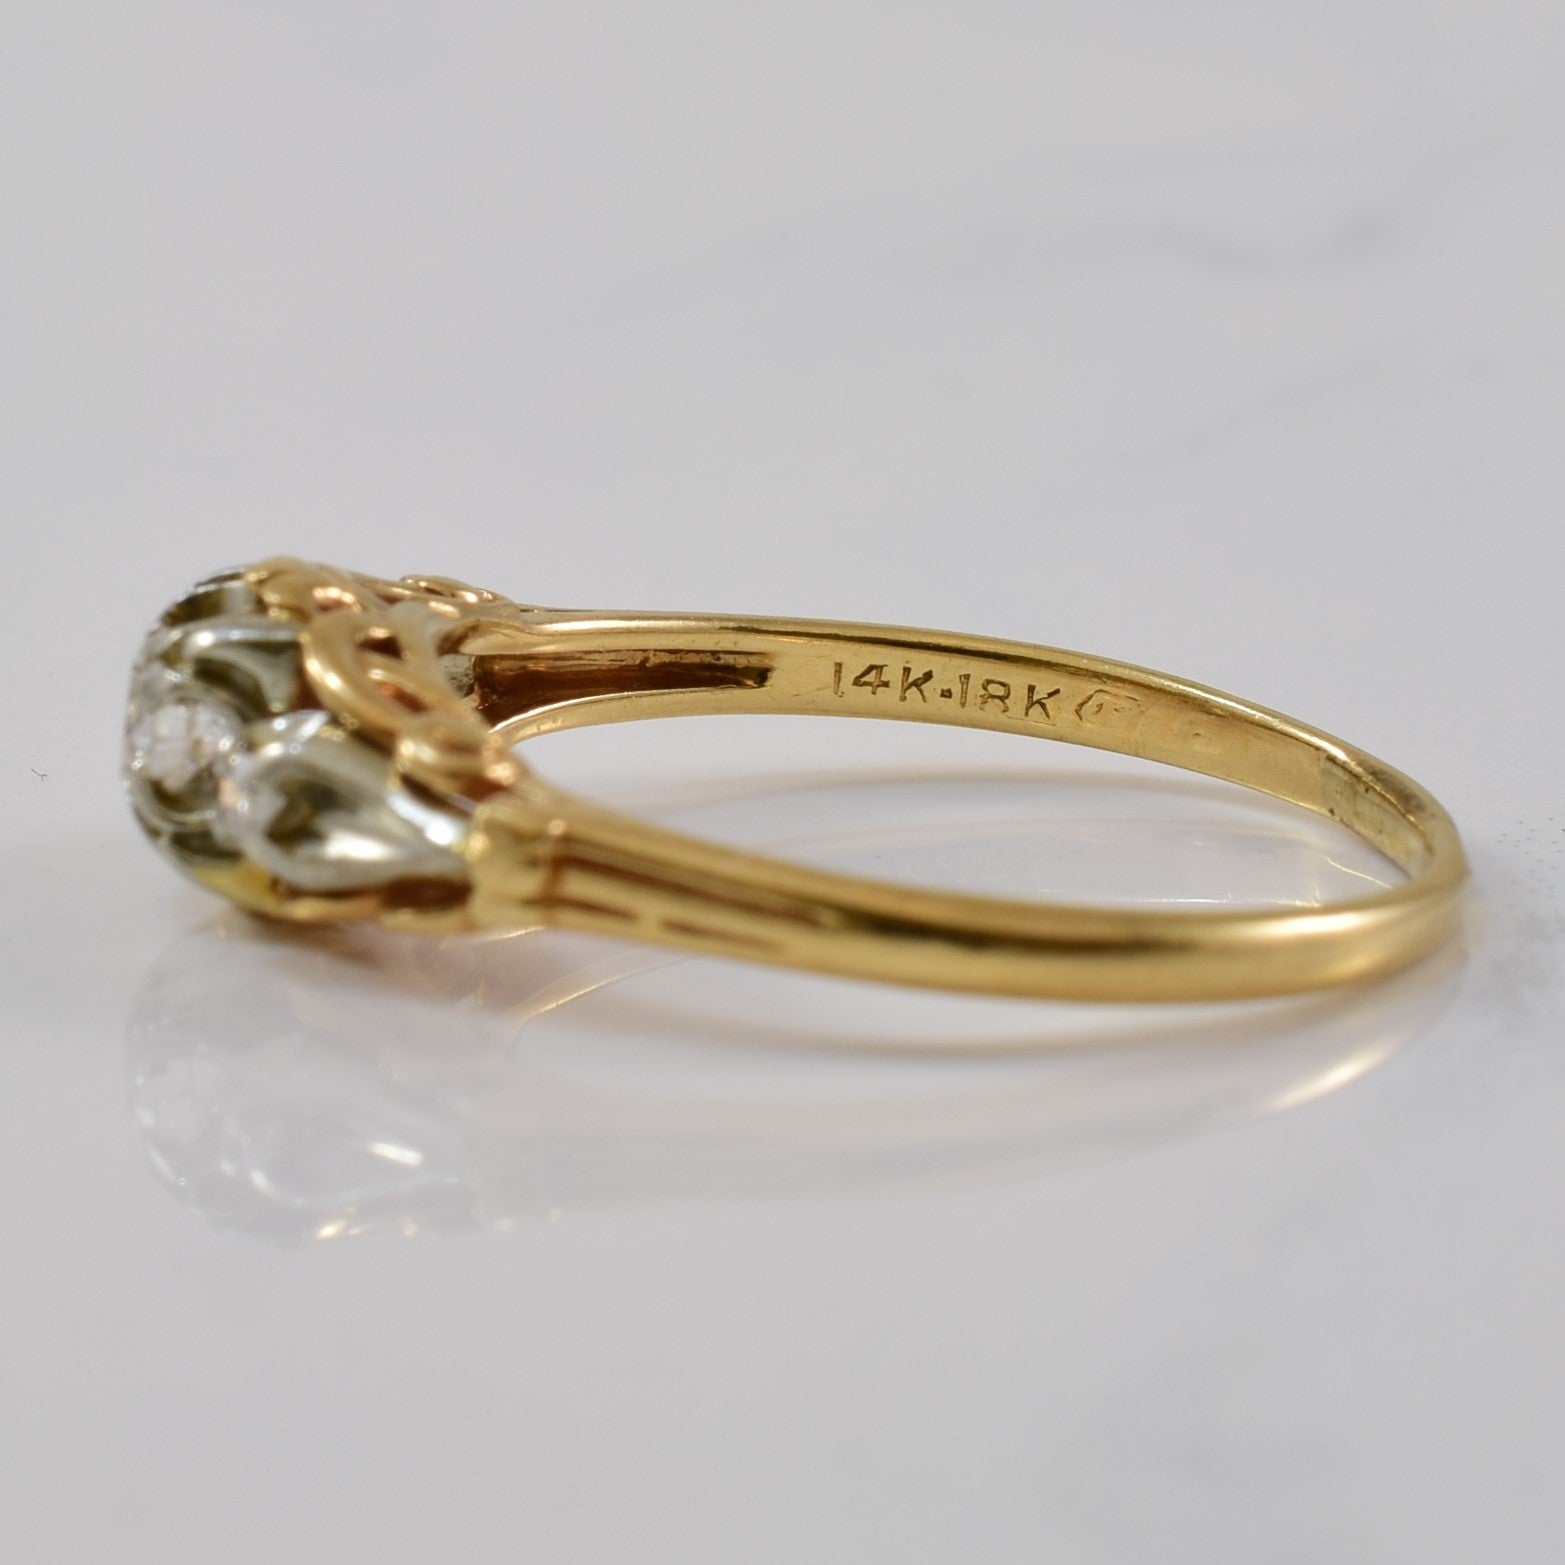 gold and diamond three stone diamond rings for sale in USA and Canada, vintage rings for sale